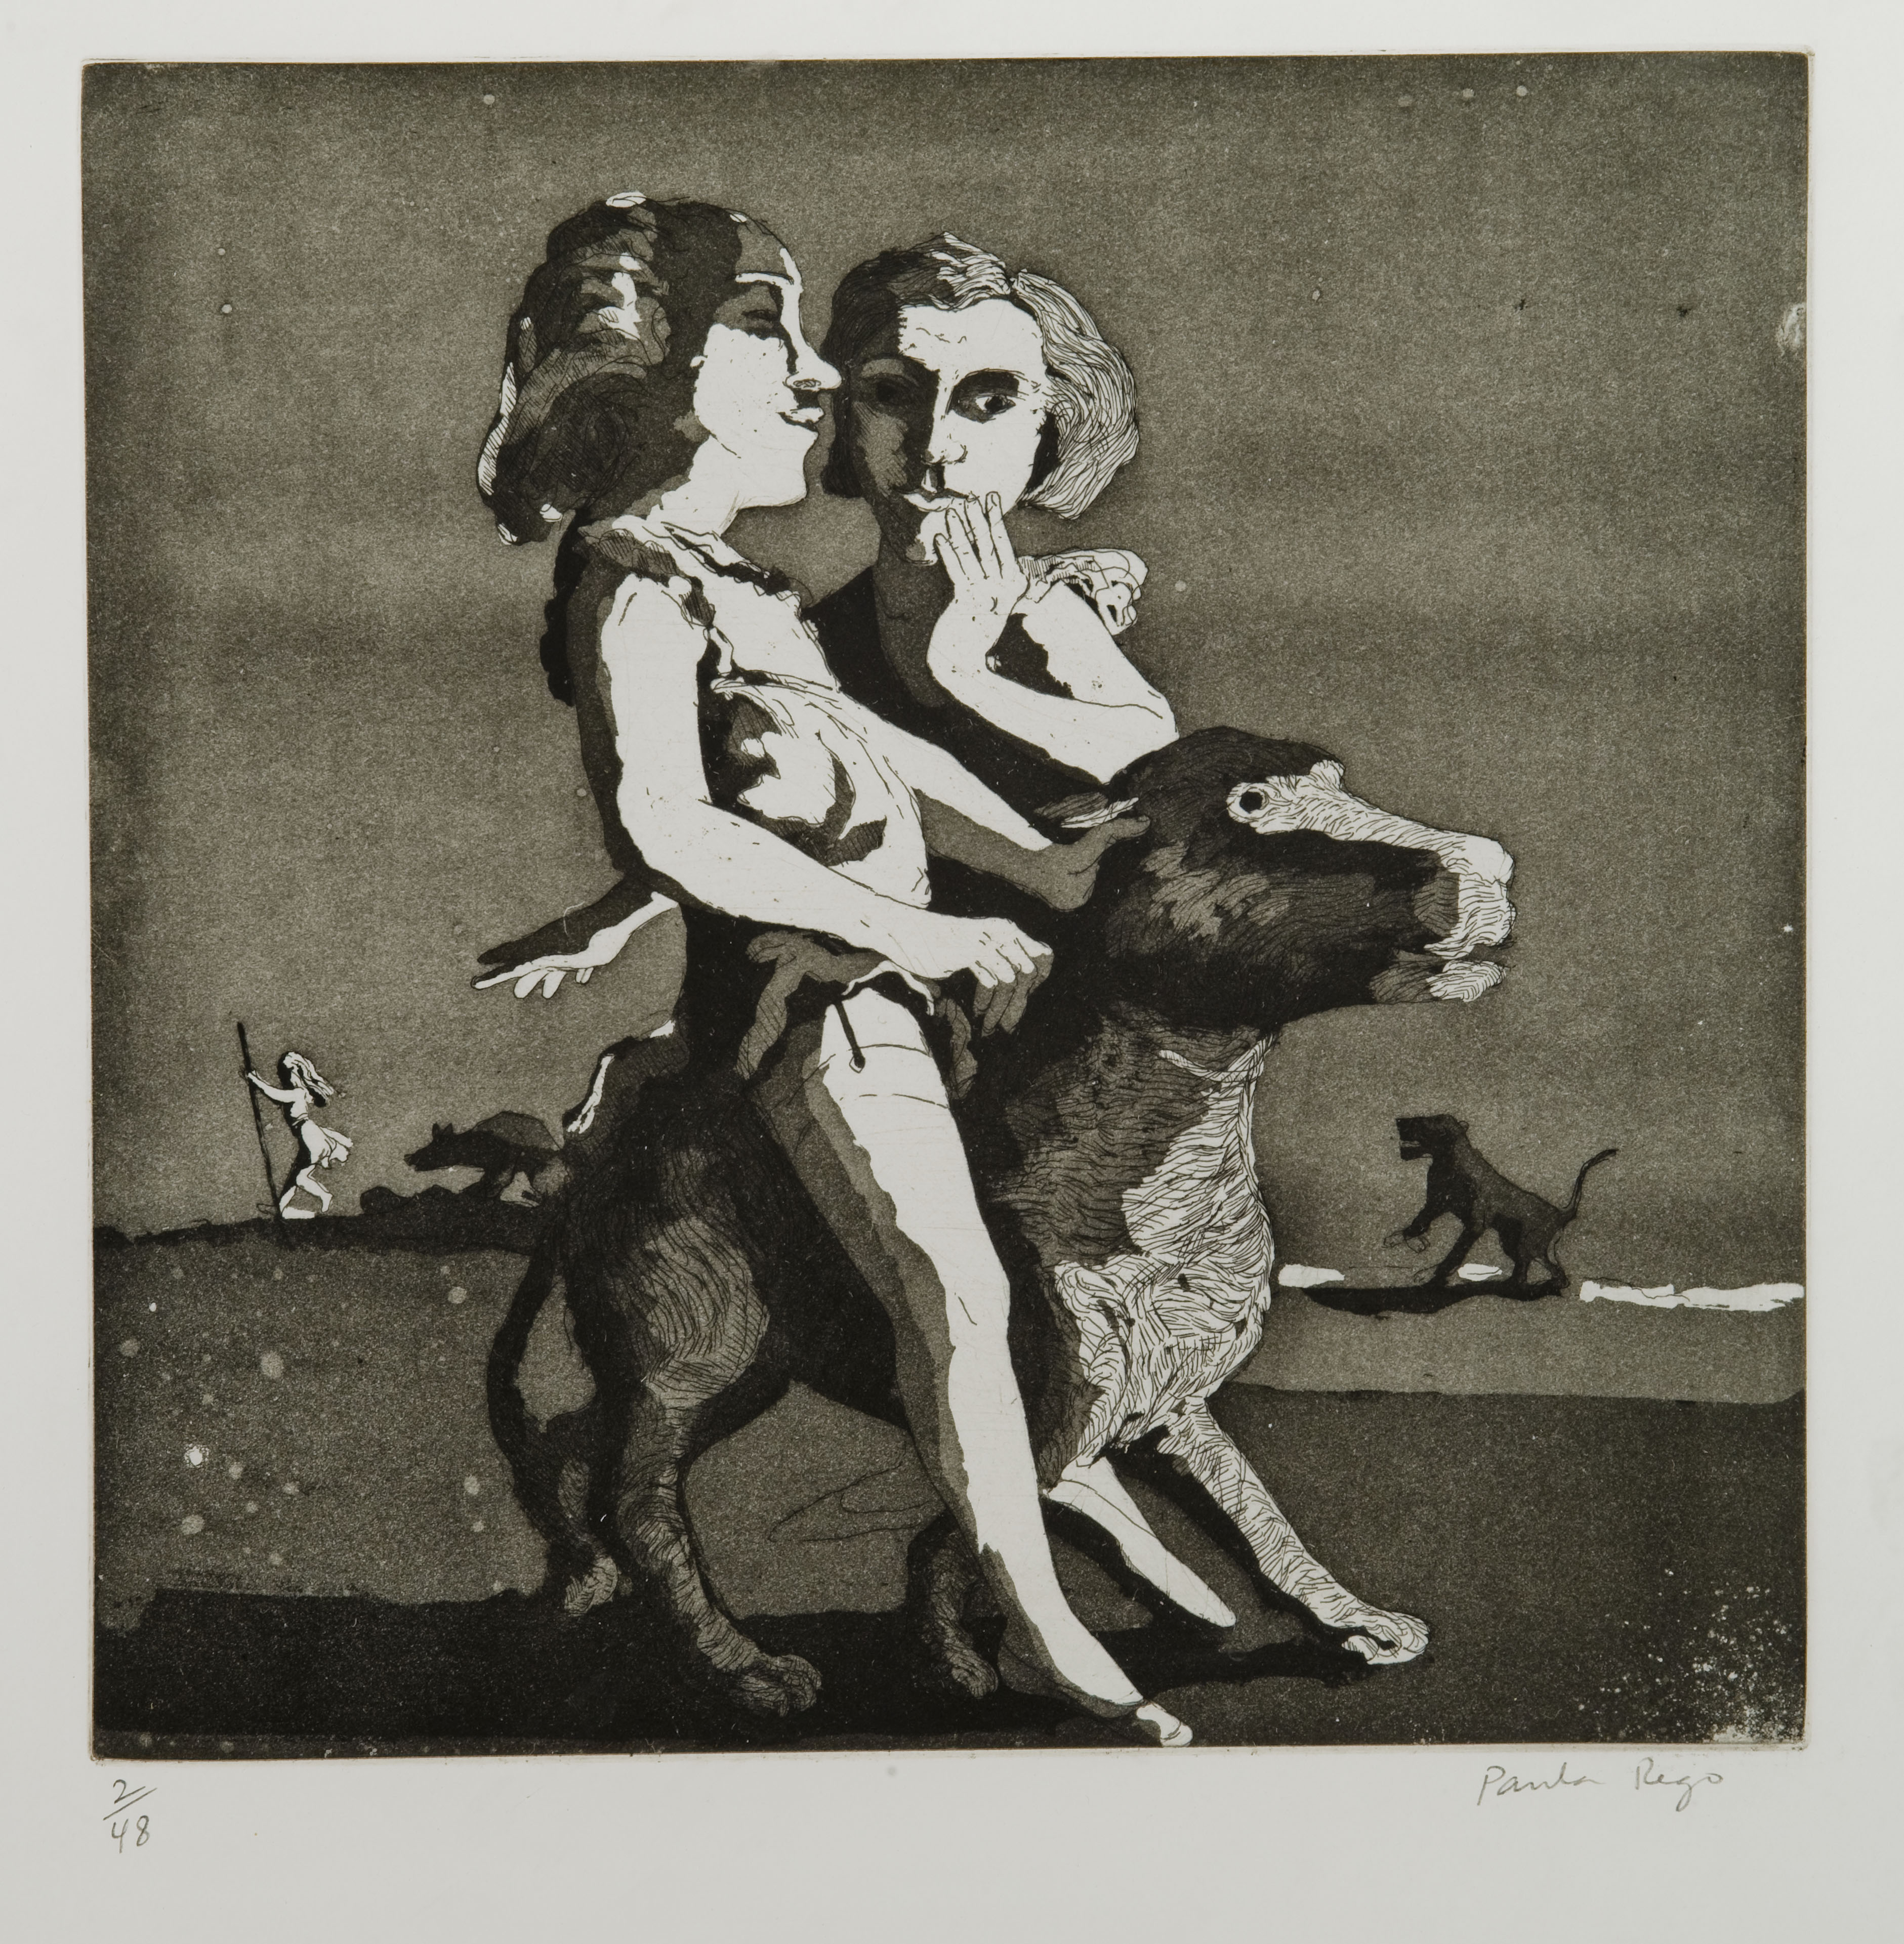 A mono etching and aquatint. In the foreground are two young girls, one sat astride a large dog, her feet on the ground. Behind her is another girl, hand held to her mouth as if whispering to the other. Both wear white blouses with frilled, sleeves, cropped at the shoulder. The dog has its ears pulled back and looks alarmed. In the distant background is another girl, with large spear in hand striding forth wearing a short, white dress. Following behind are two large, dark dogs, pictured either side of the girls in the foreground.